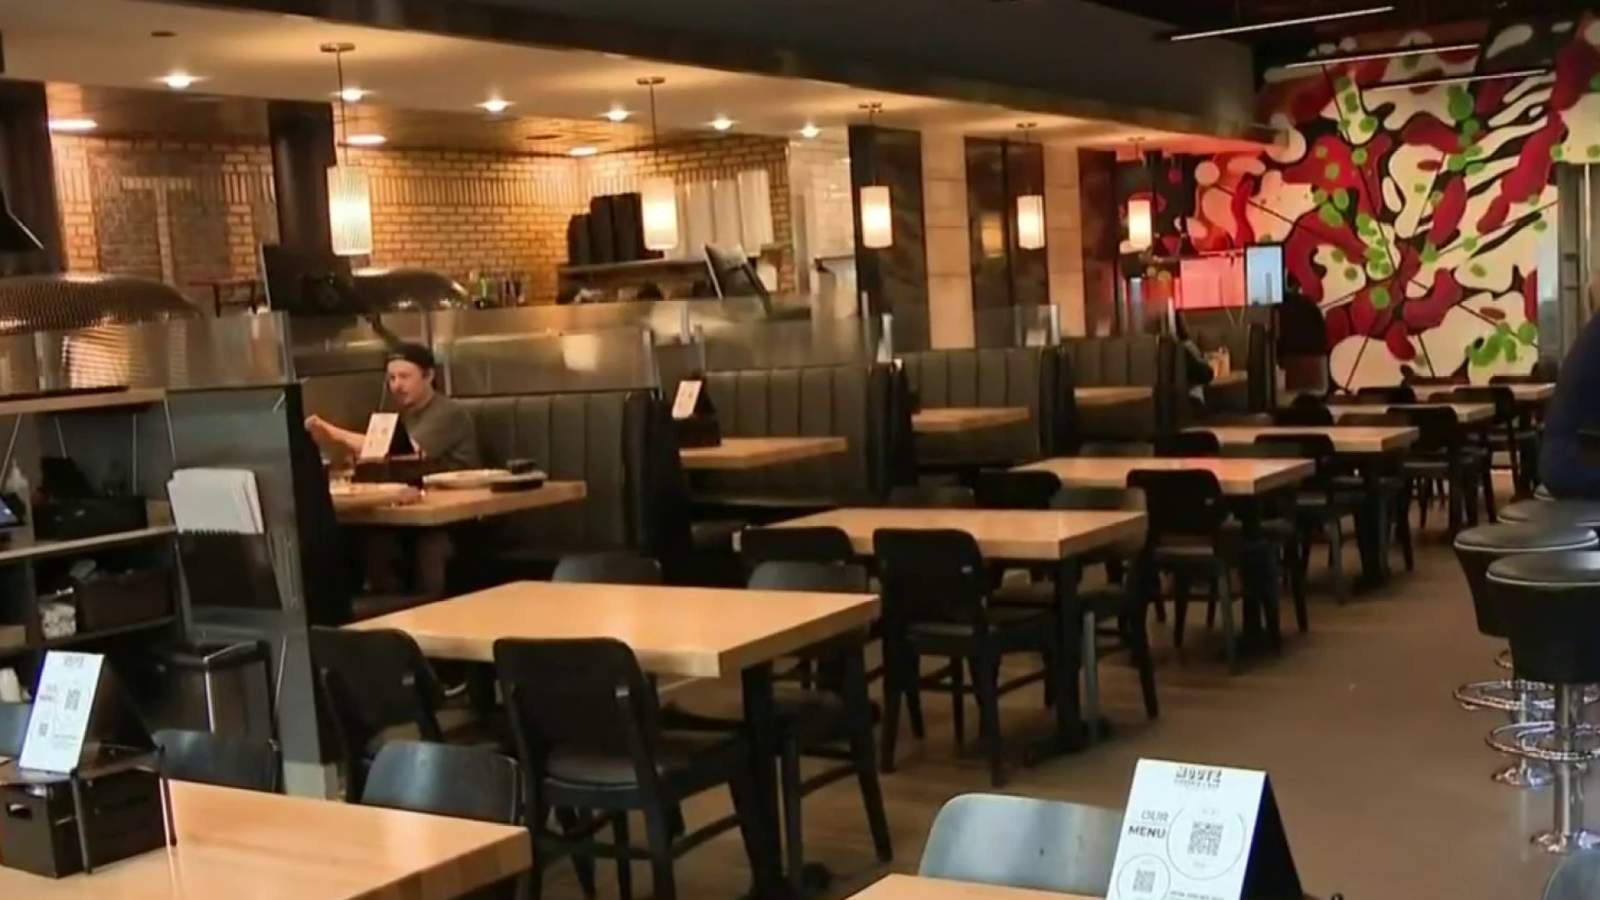 Bill passed by Republican-controlled Senate would trigger restaurant restrictions in Michigan